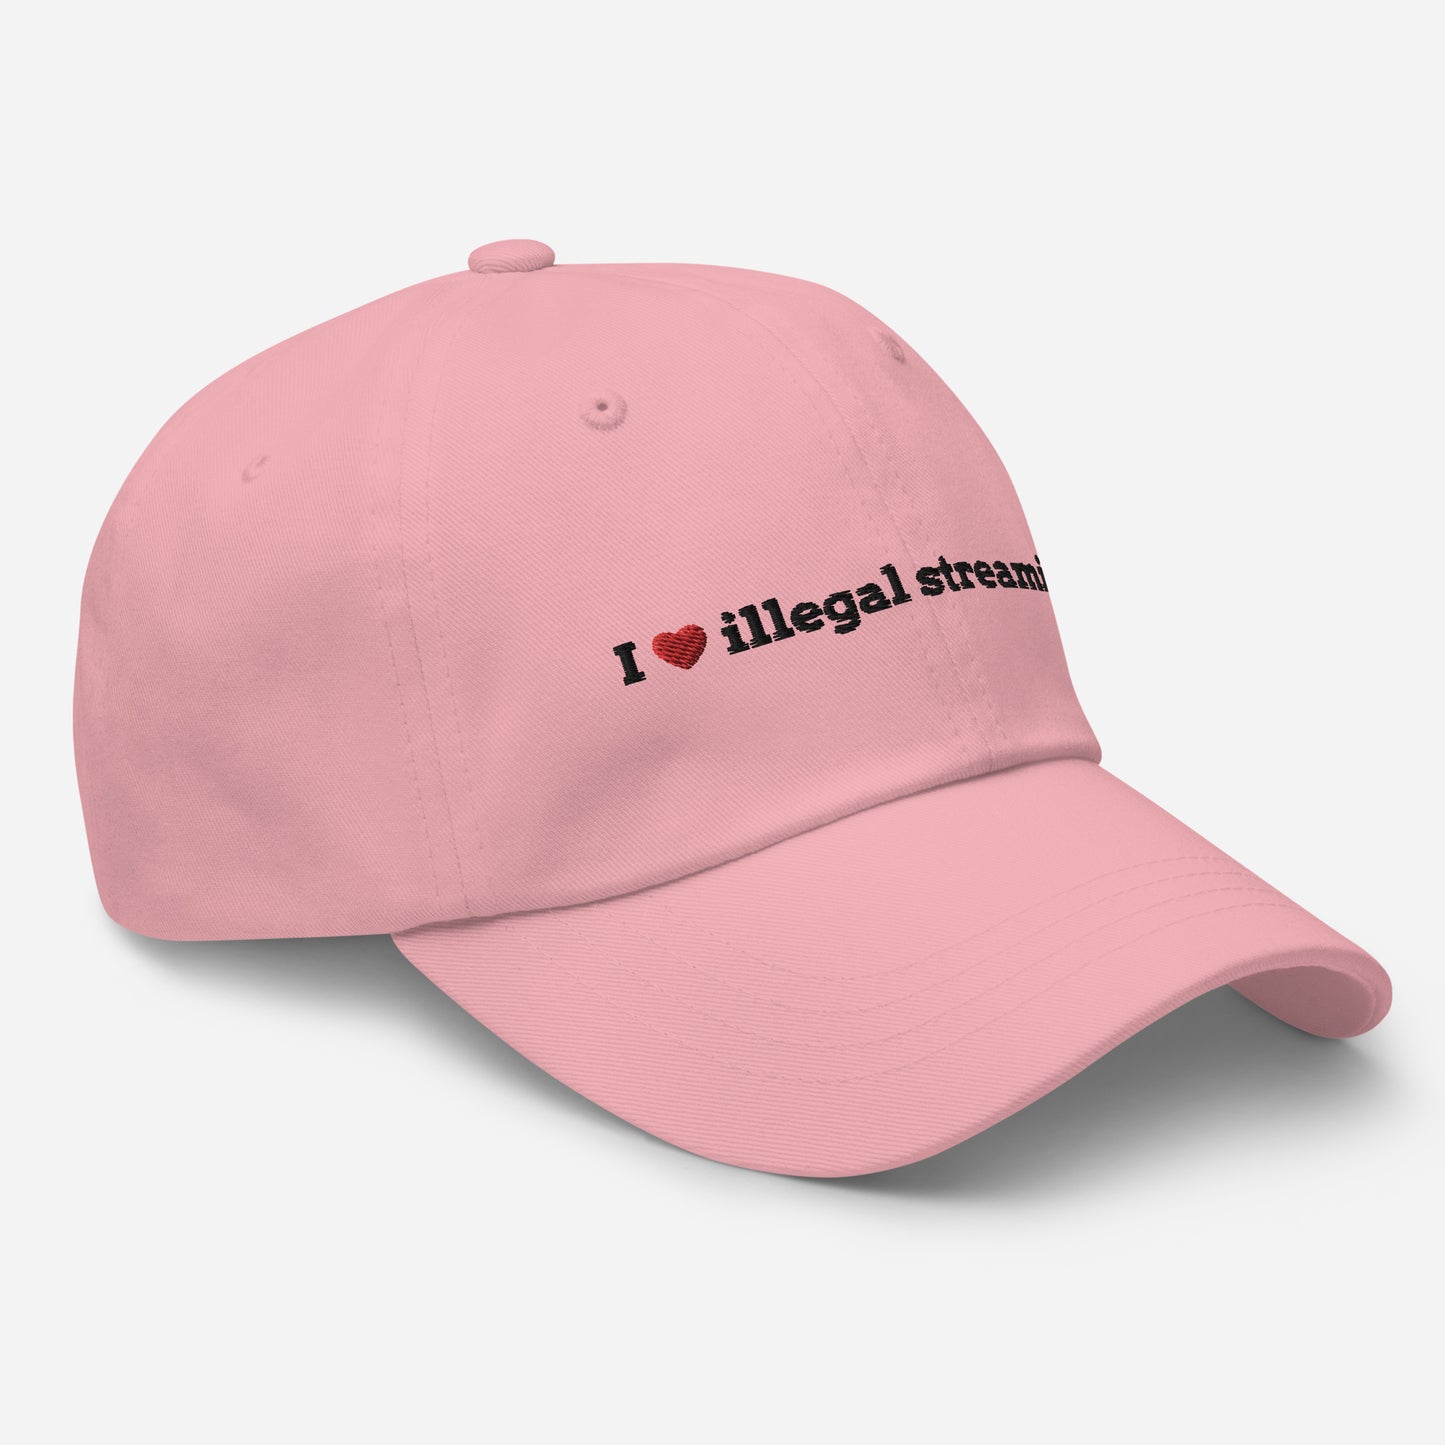 I heart illegal streaming Dad hat